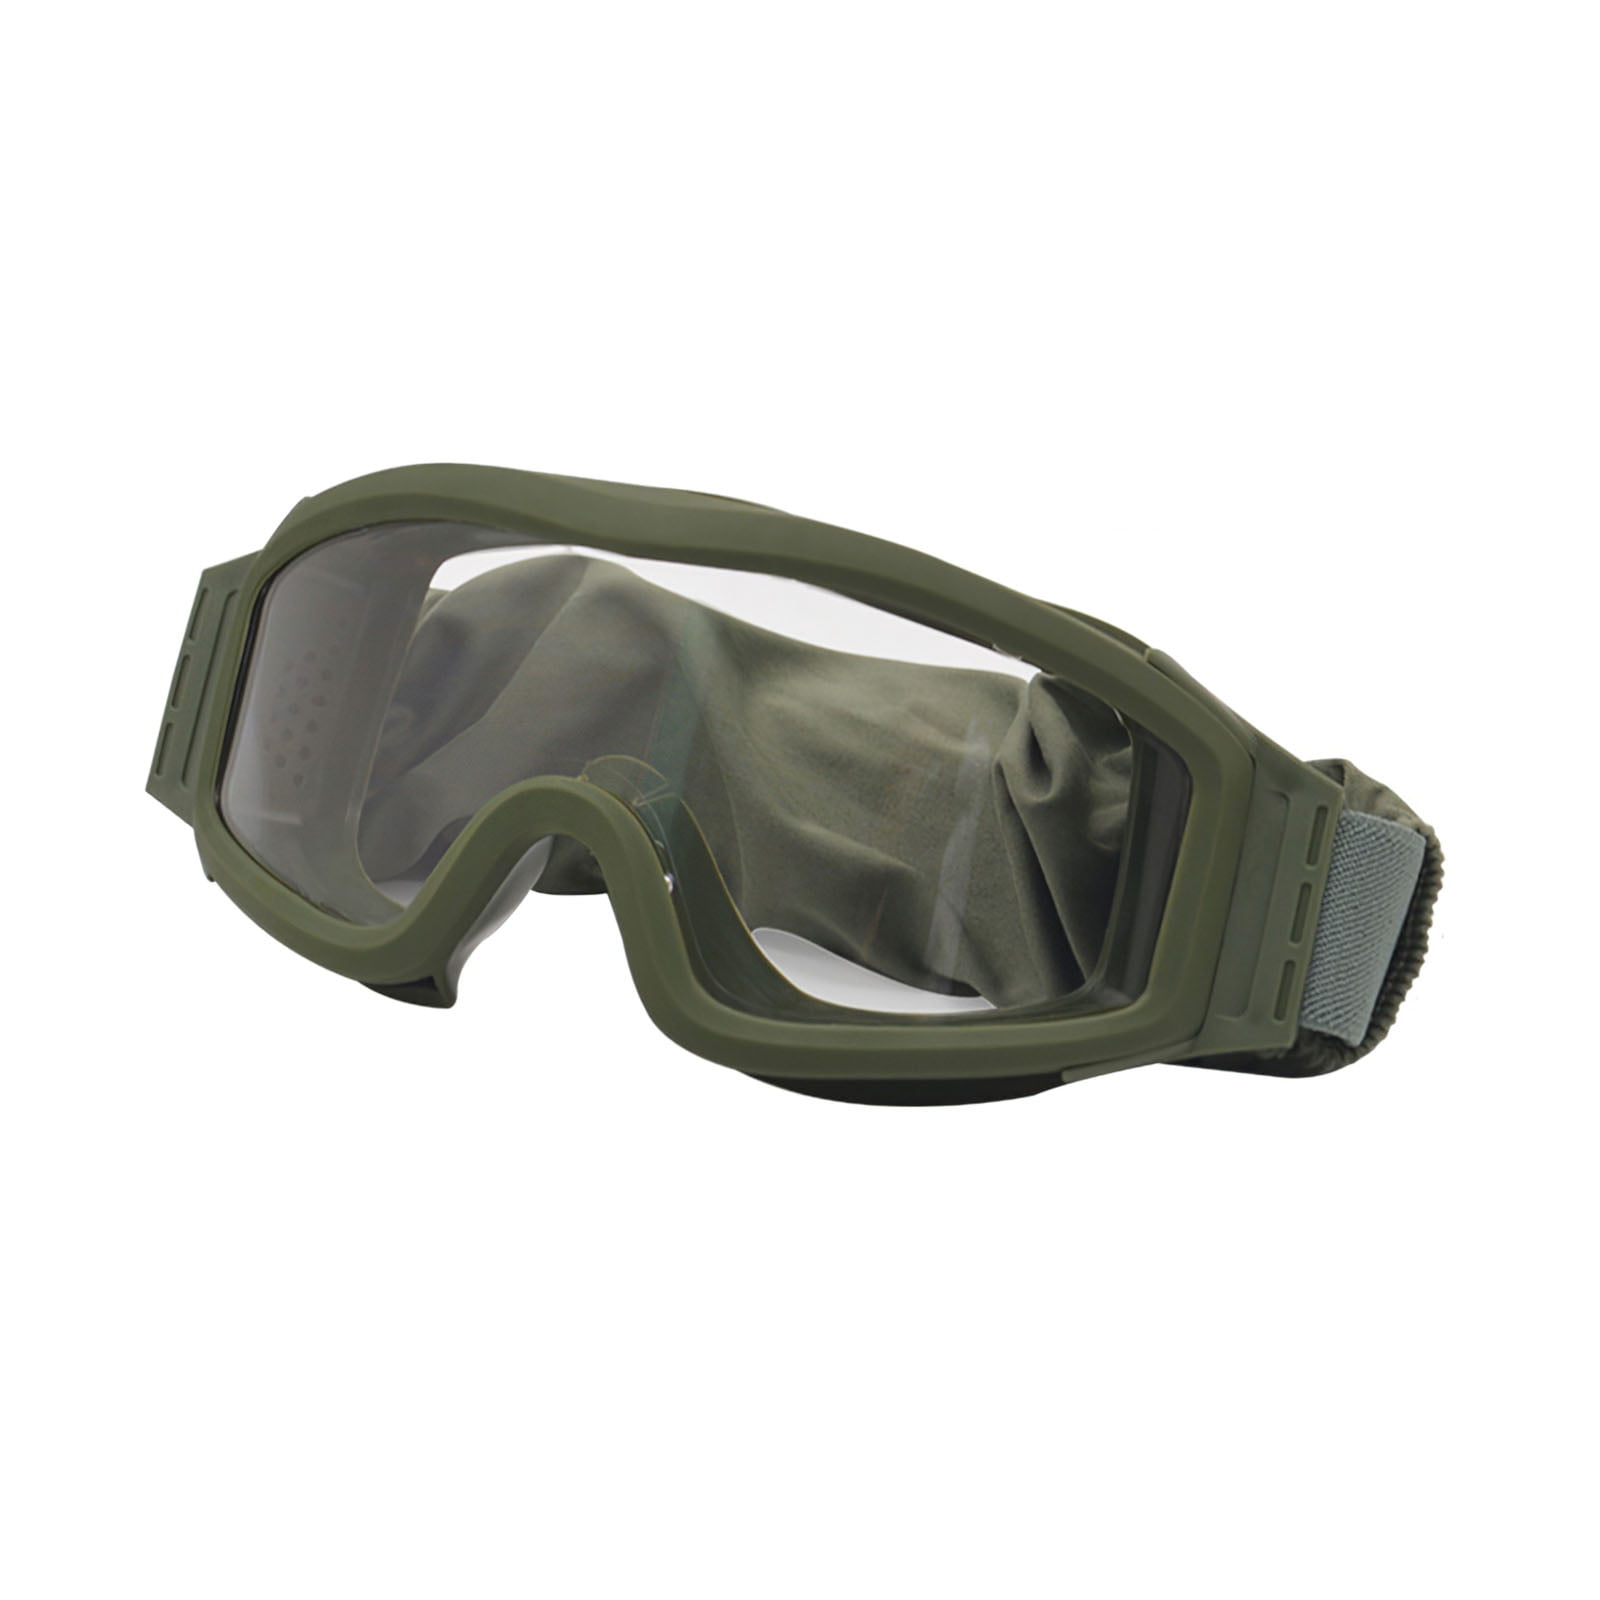 Details about   Anti-Fog Tactics Goggles Airsoft Paintball Ski Anti-Dust Eye Protection Glasses! 